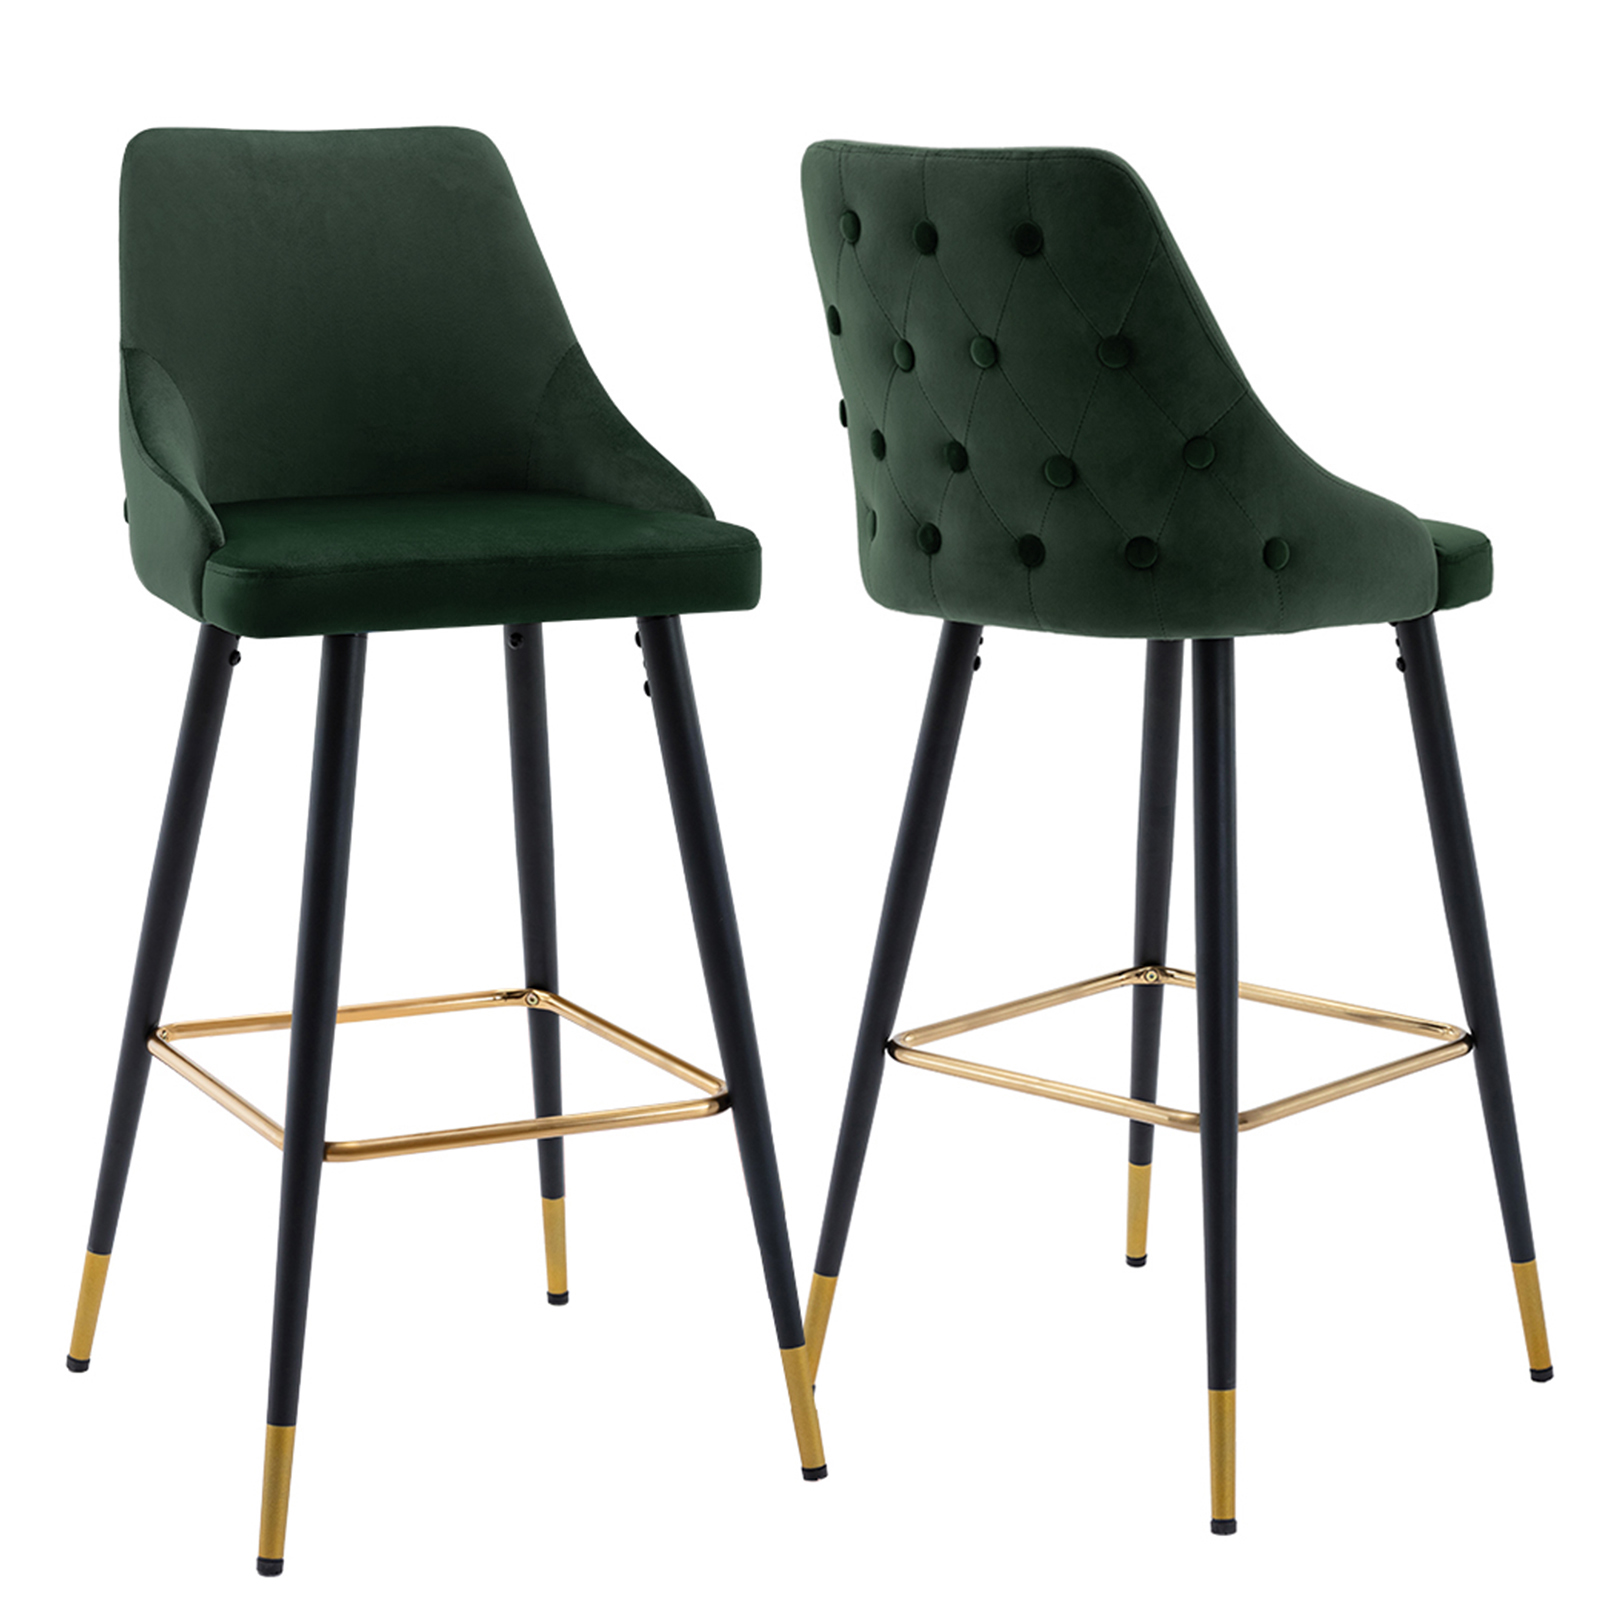 Modern Tall Bar Chairs For Home Kitchen, Bar Stool Set Of 2 With Back